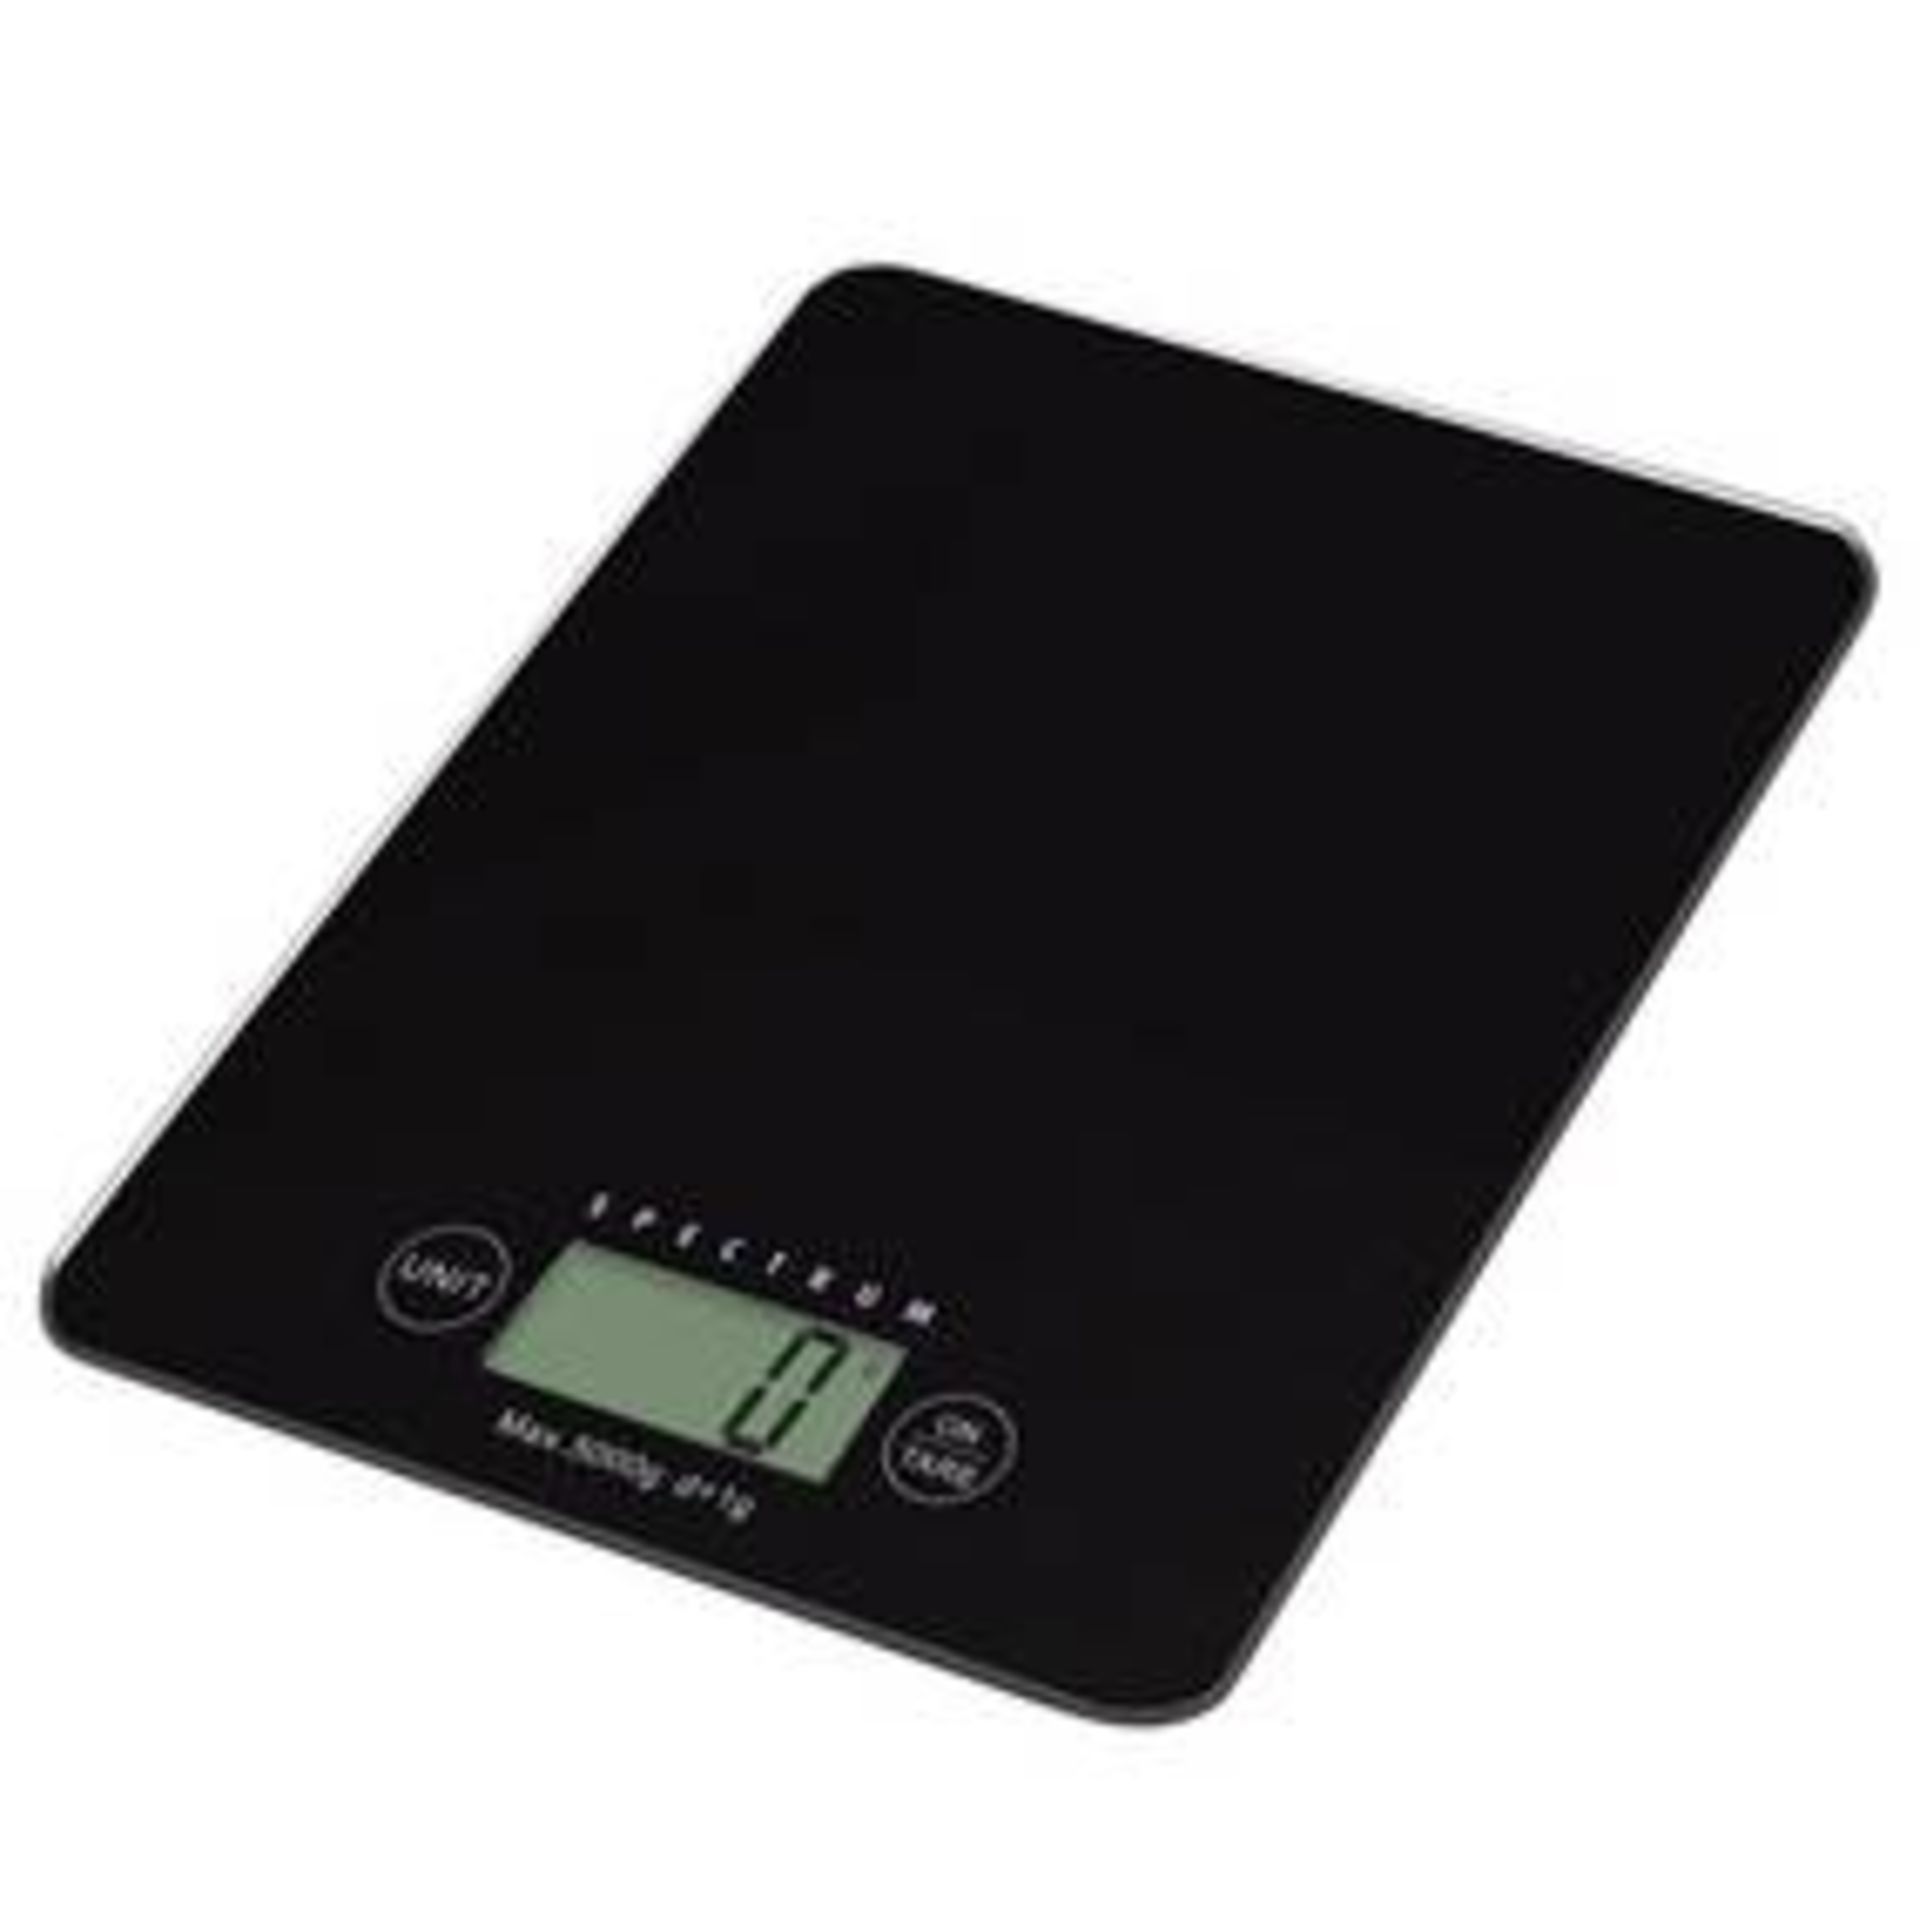 V Brand New Digital Kitchen Scales with Large LCD Display in lbs OZs and Grams (Styles may vary - Image 2 of 4